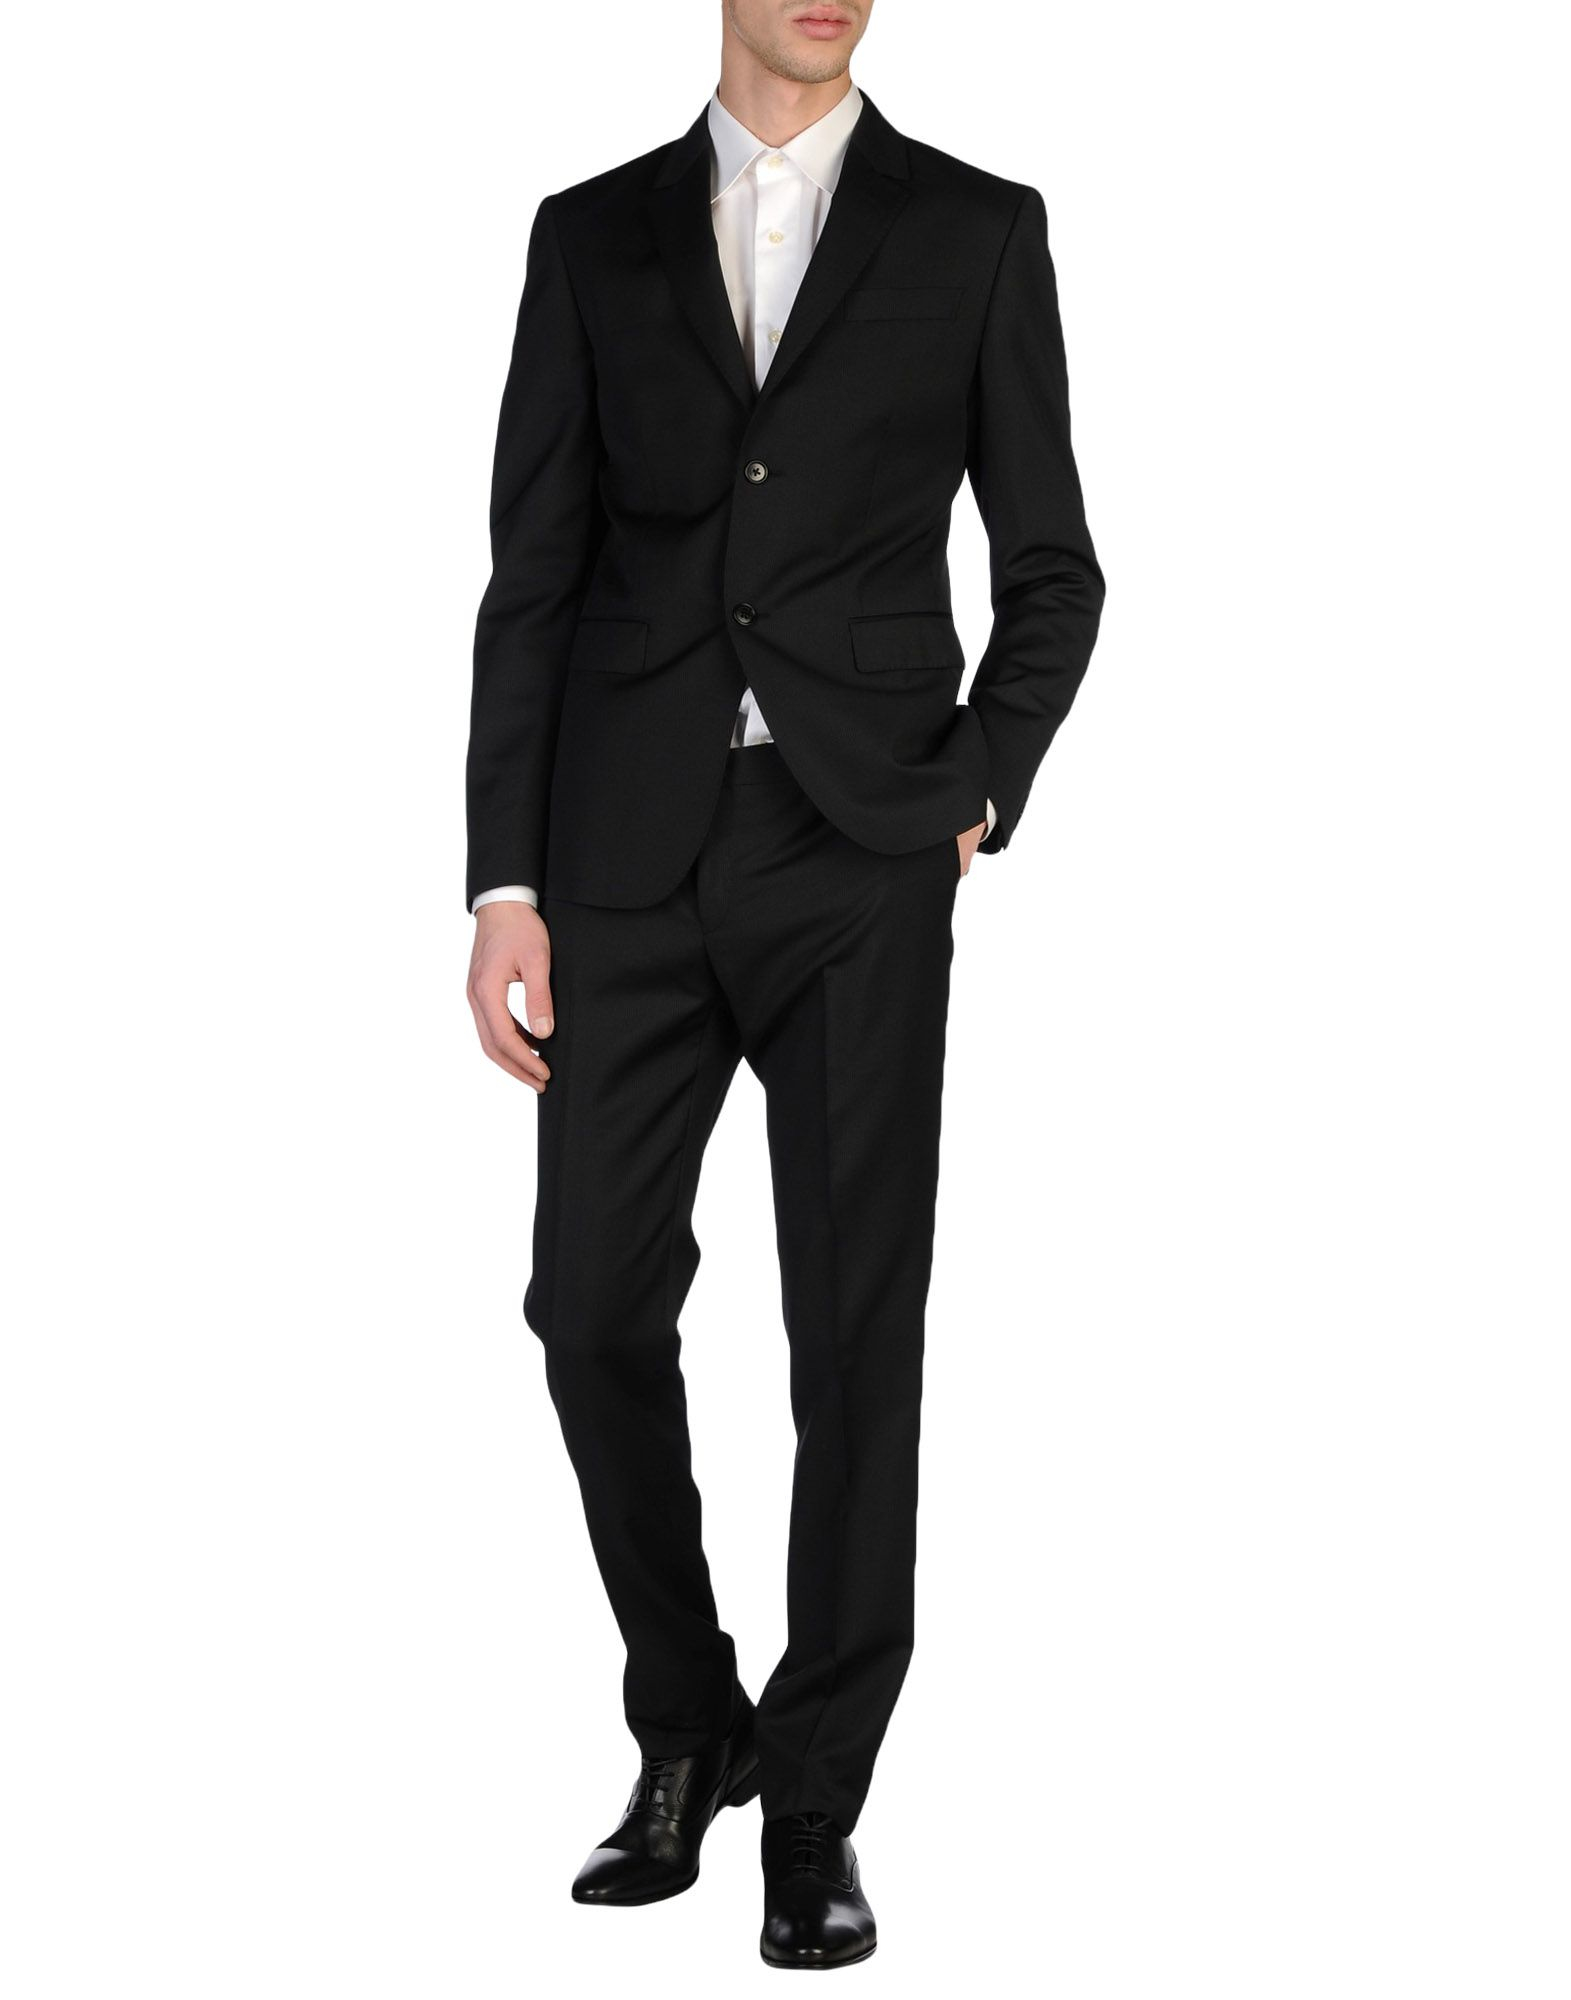 Lyst - Moschino Suit in Black for Men